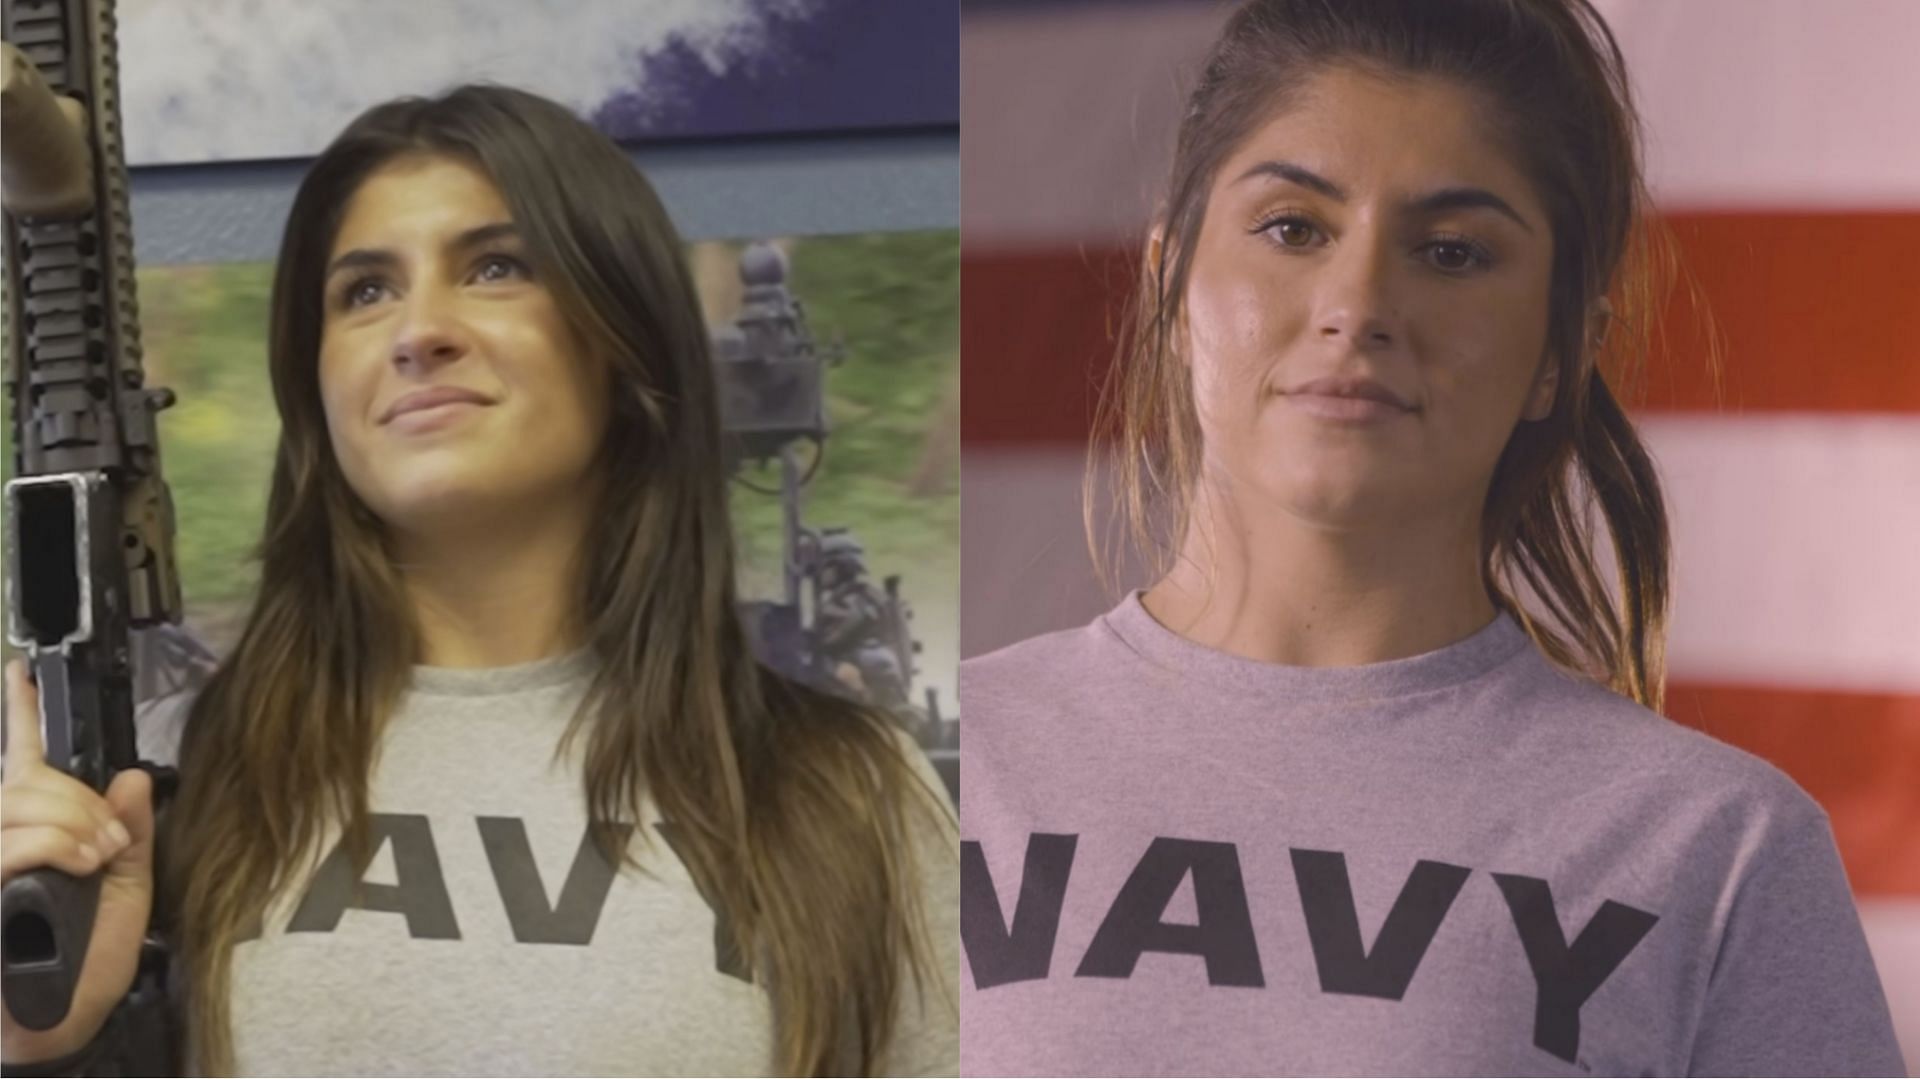 Hailie Deegan trains with the US Navy for a day at Colorado